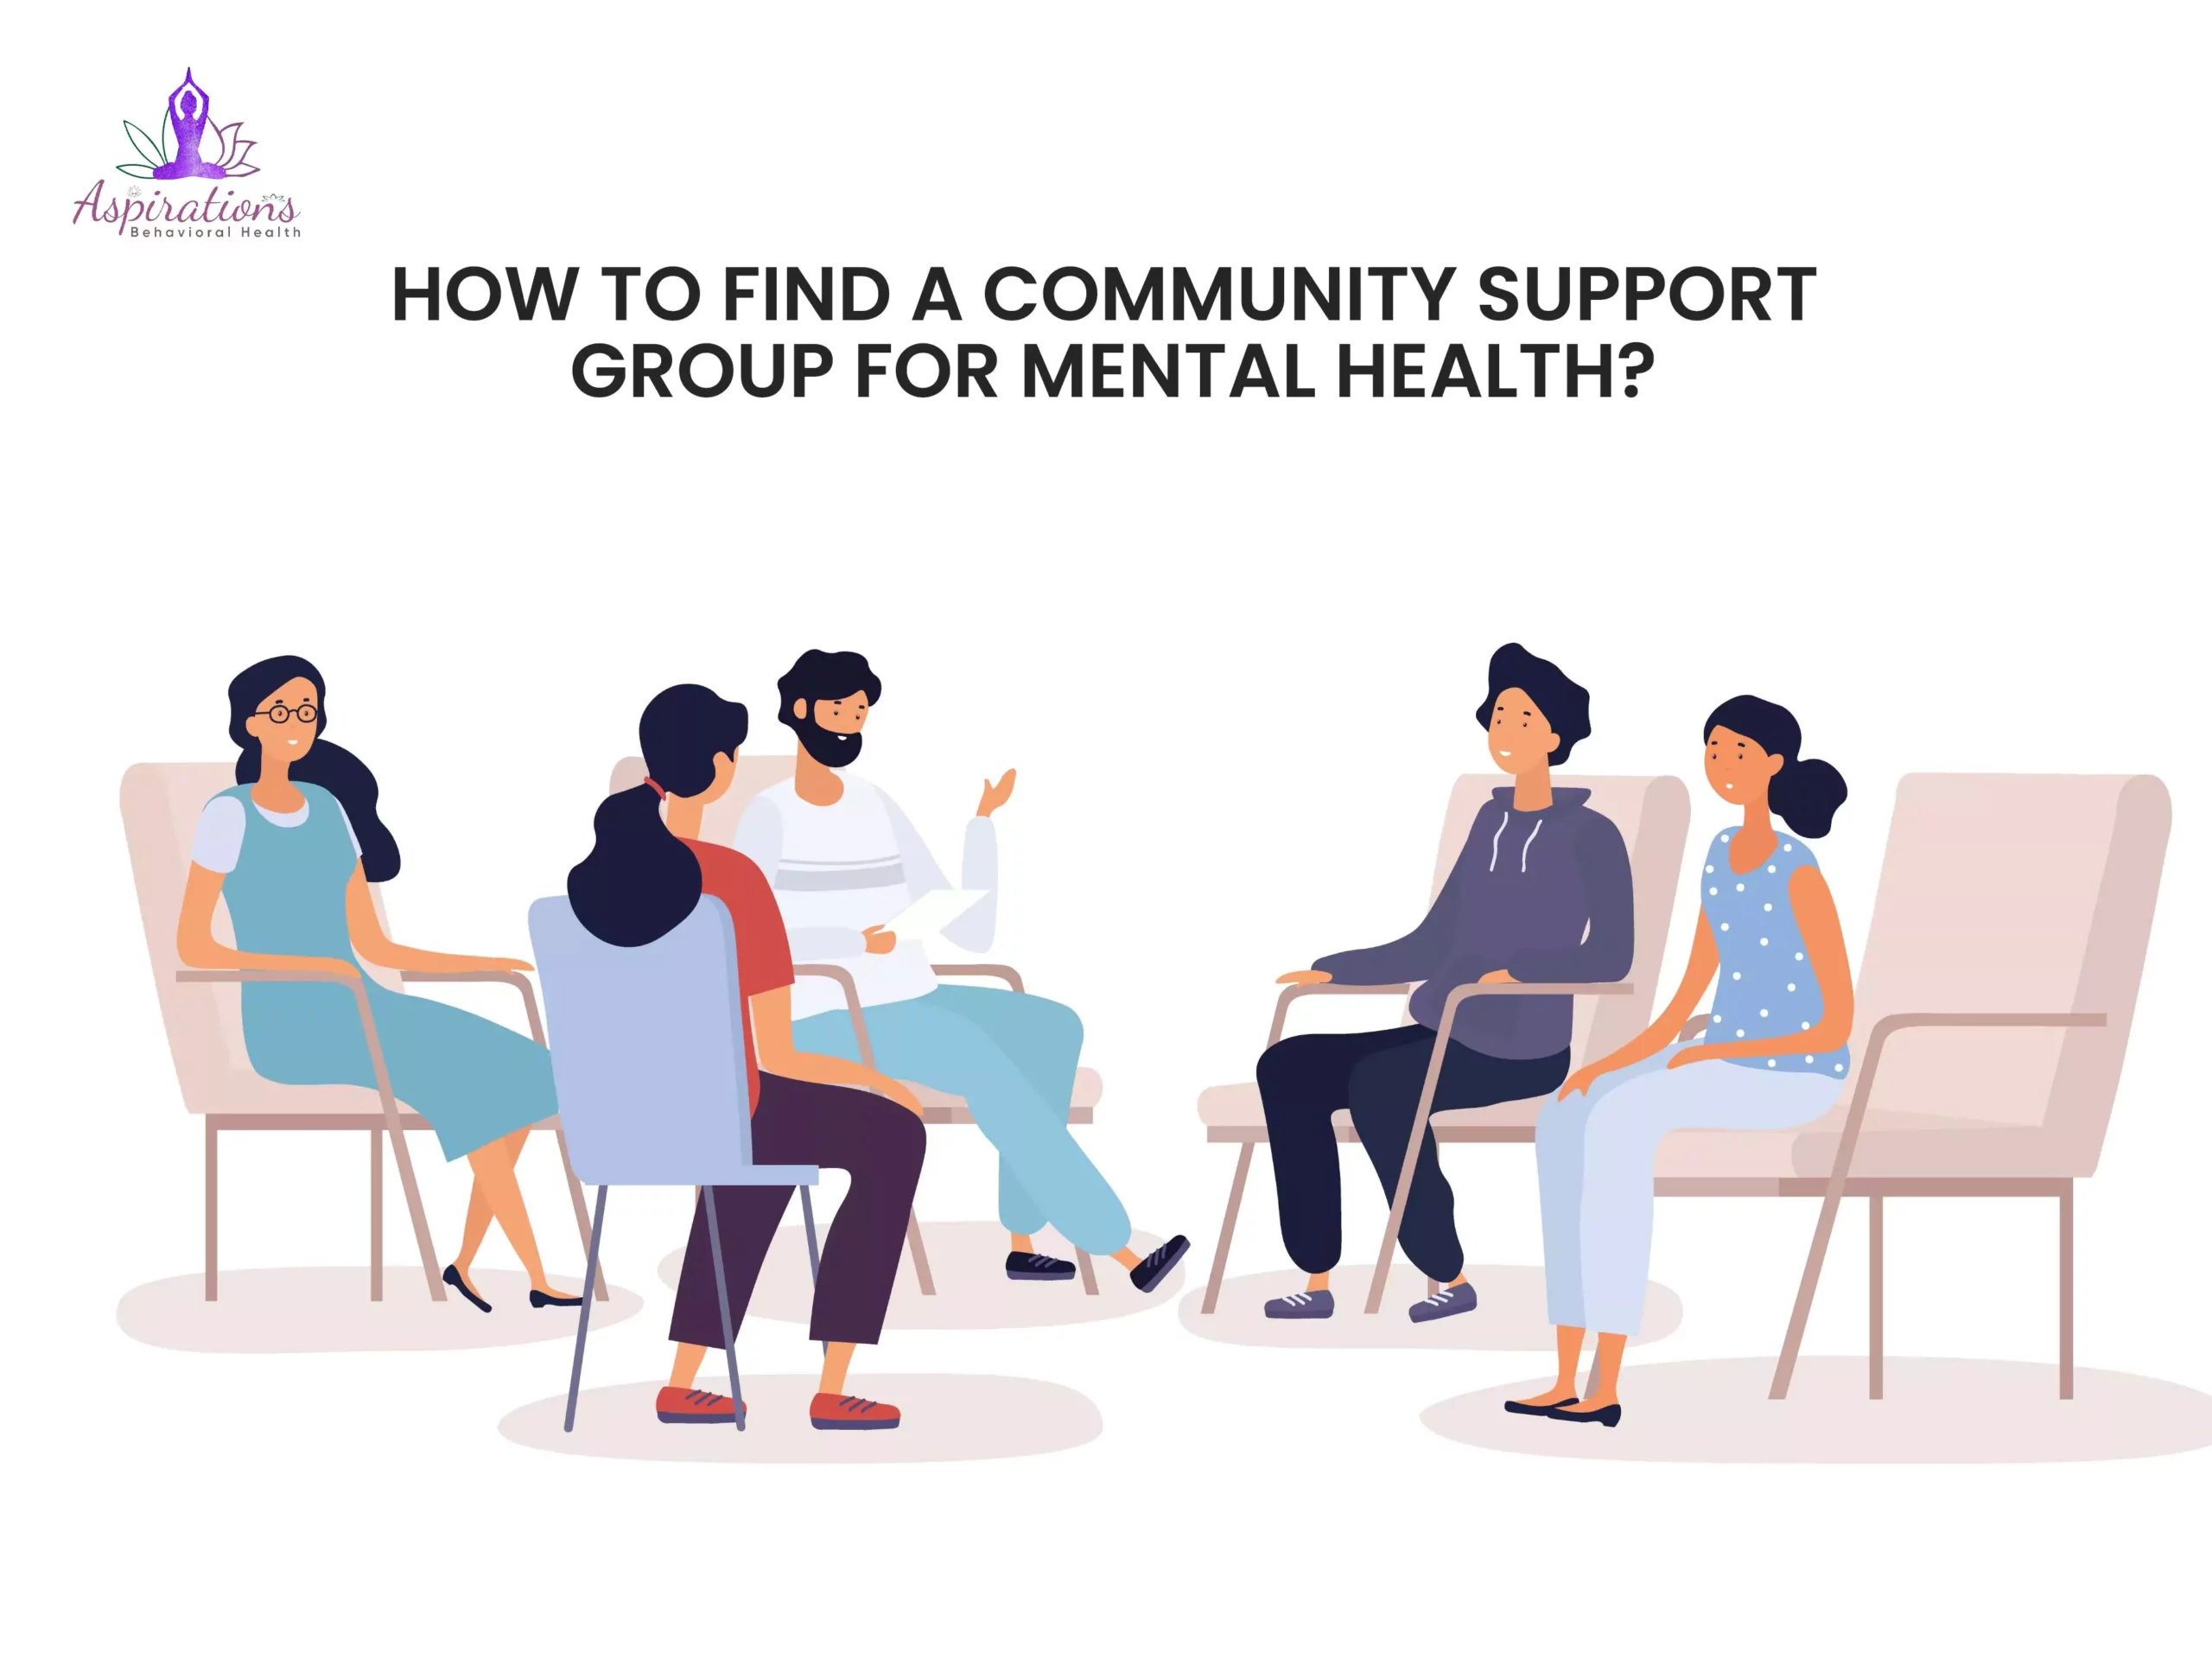 How to Find a Community Support Group for Mental Health?